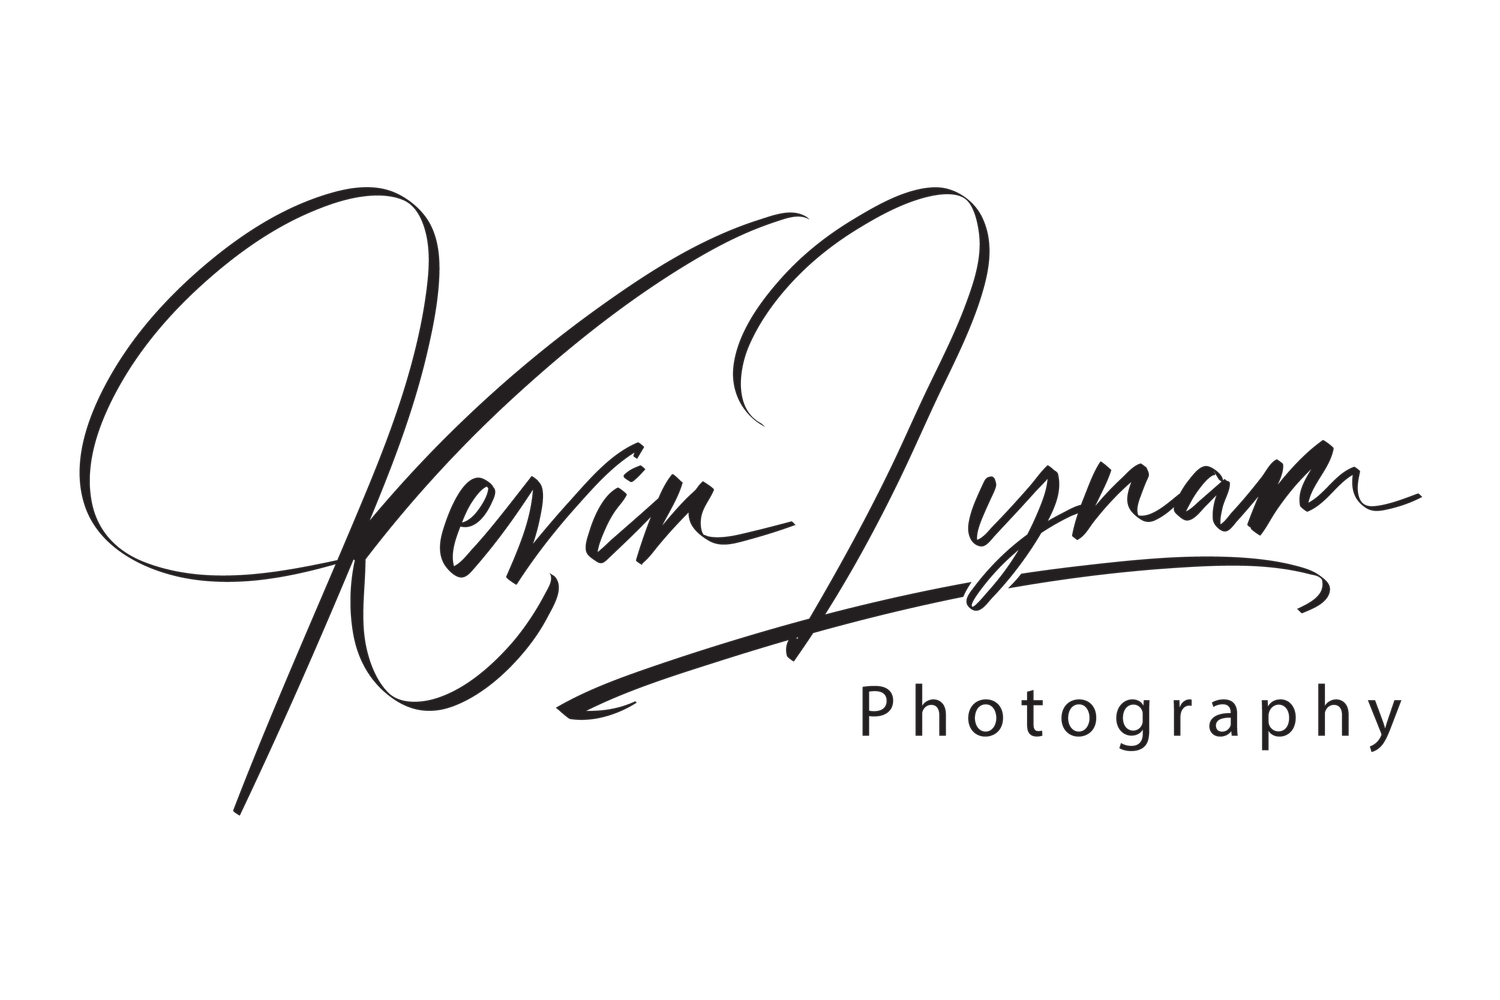 Kevin Lynam Photography